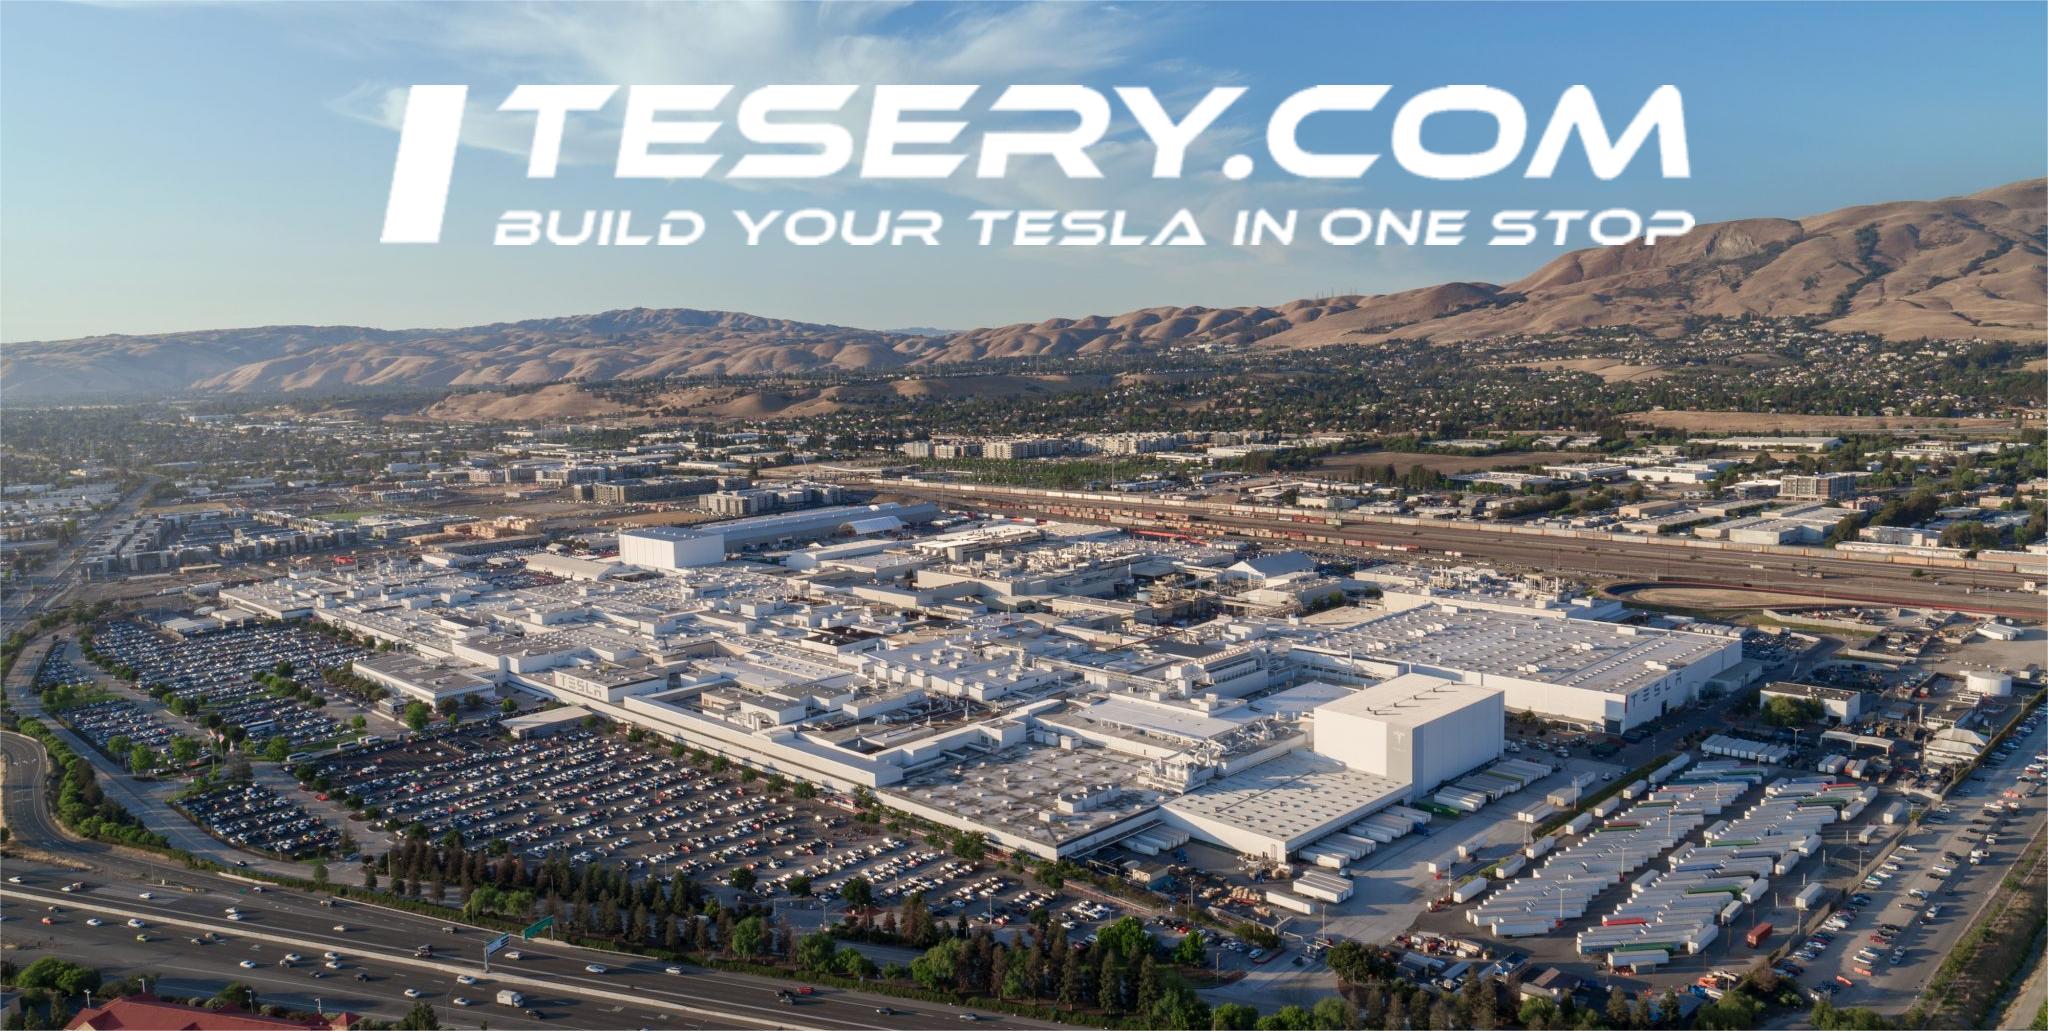 Tesla's Fremont Factory: Brief Pause and Swift Resumption of Operations - Tesery Official Store